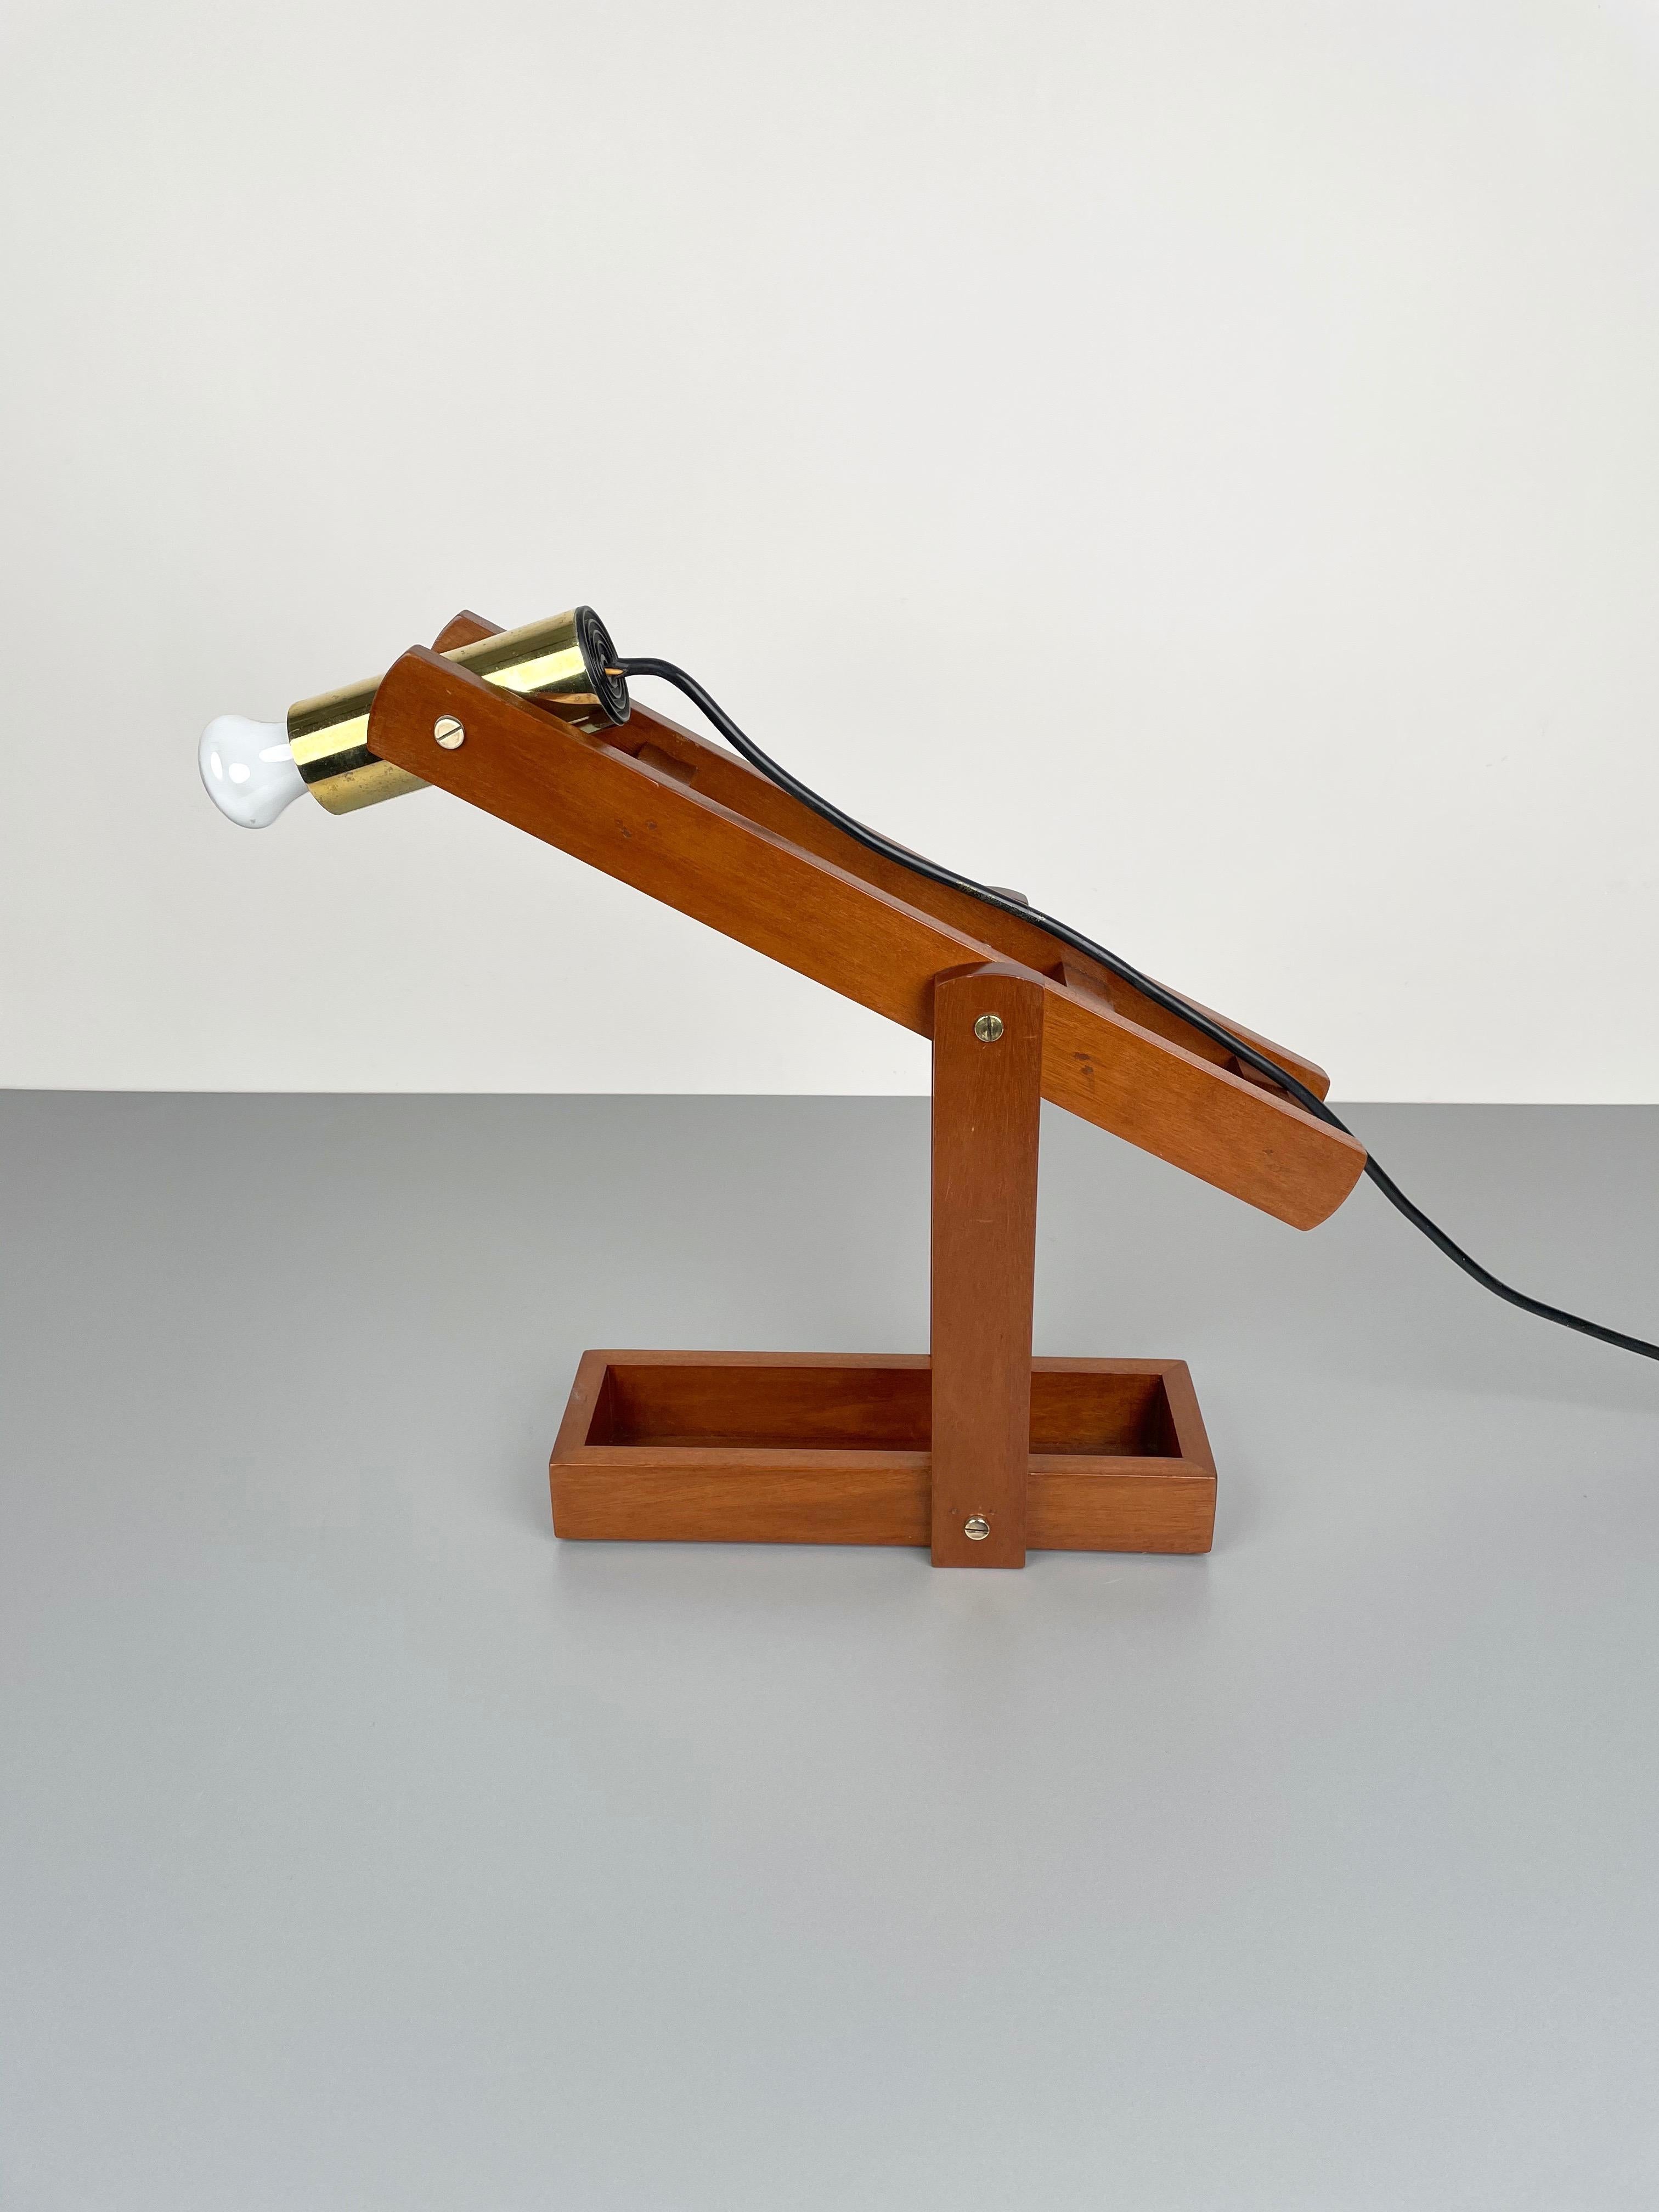 Metal Adjustable Wood & Brass Table Lamp, Italy, 1960s For Sale